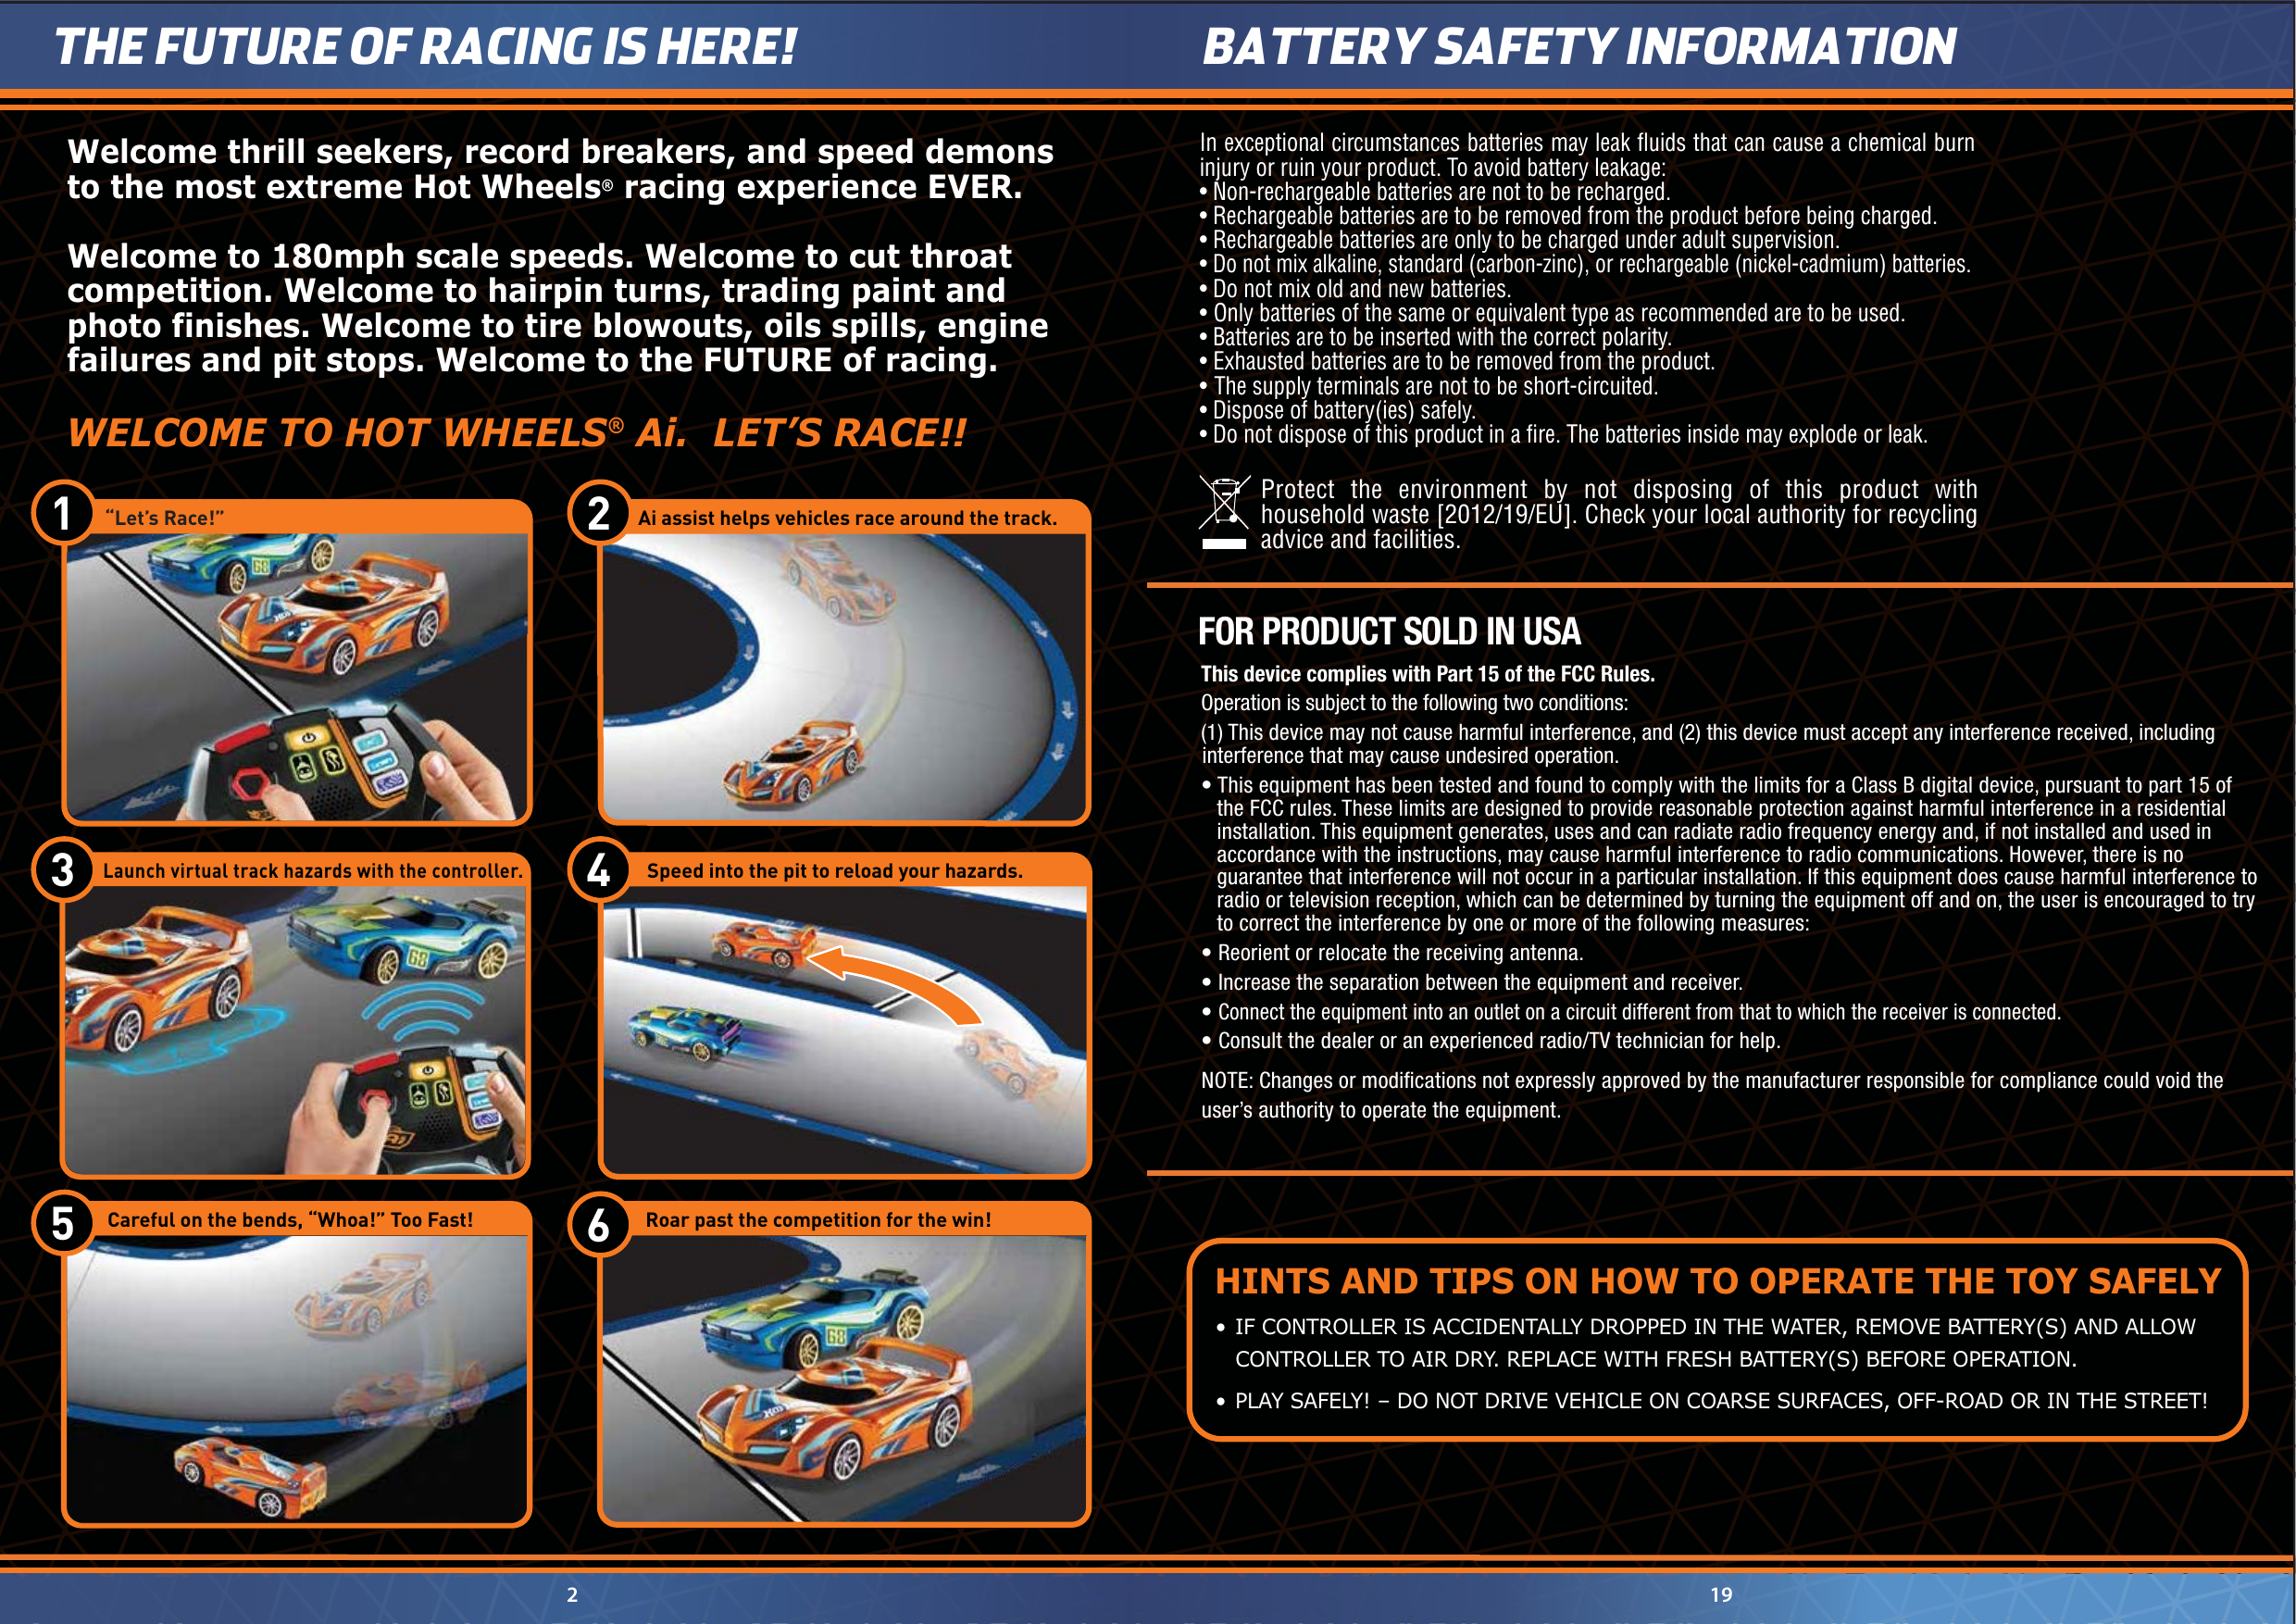 •  IF CONTROLLER IS ACCIDENTALLY DROPPED IN THE WATER, REMOVE BATTERY(S) AND ALLOW    CONTROLLER TO AIR DRY. REPLACE WITH FRESH BATTERY(S) BEFORE OPERATION.•  PLAY SAFELY! – DO NOT DRIVE VEHICLE ON COARSE SURFACES, OFF-ROAD OR IN THE STREET!HINTS AND TIPS ON HOW TO OPERATE THE TOY SAFELY2THE FUTURE OF RACING IS HERE!19BATTERY SAFETY INFORMATION Protect the environment by not disposing of this product with household waste [2012/19/EU]. Check your local authority for recycling advice and facilities. In exceptional circumstances batteries may leak ﬂuids that can cause a chemical burn injury or ruin your product. To avoid battery leakage:• Non-rechargeable batteries are not to be recharged.• Rechargeable batteries are to be removed from the product before being charged.• Rechargeable batteries are only to be charged under adult supervision.• Do not mix alkaline, standard (carbon-zinc), or rechargeable (nickel-cadmium) batteries.• Do not mix old and new batteries.•  Only batteries of the same or equivalent type as recommended are to be used.• Batteries are to be inserted with the correct polarity.• Exhausted batteries are to be removed from the product.• The supply terminals are not to be short-circuited.• Dispose of battery(ies) safely.• Do not dispose of this product in a ﬁre. The batteries inside may explode or leak.NOTE: Changes or modiﬁcations not expressly approved by the manufacturer responsible for compliance could void the user’s authority to operate the equipment.This device complies with Part 15 of the FCC Rules.Operation is subject to the following two conditions: (1) This device may not cause harmful interference, and (2) this device must accept any interference received, including interference that may cause undesired operation.• This equipment has been tested and found to comply with the limits for a Class B digital device, pursuant to part 15 of the FCC rules. These limits are designed to provide reasonable protection against harmful interference in a residential installation. This equipment generates, uses and can radiate radio frequency energy and, if not installed and used in accordance with the instructions, may cause harmful interference to radio communications. However, there is no guarantee that interference will not occur in a particular installation. If this equipment does cause harmful interference to radio or television reception, which can be determined by turning the equipment off and on, the user is encouraged to try to correct the interference by one or more of the following measures:• Reorient or relocate the receiving antenna.• Increase the separation between the equipment and receiver.• Connect the equipment into an outlet on a circuit different from that to which the receiver is connected.• Consult the dealer or an experienced radio/TV technician for help.FOR PRODUCT SOLD IN USA     “Let’s Race!”1  2    Ai assist helps vehicles race around the track.6   Careful on the bends, “Whoa!” Too Fast!  Roar past the competition for the win!5   Speed into the pit to reload your hazards.4 Welcome thrill seekers, record breakers, and speed demons to the most extreme Hot Wheels® racing experience EVER.Welcome to 180mph scale speeds. Welcome to cut throat competition. Welcome to hairpin turns, trading paint and photo finishes. Welcome to tire blowouts, oils spills, engine failures and pit stops. Welcome to the FUTURE of racing. WELCOME TO HOT WHEELS® Ai.  LET’S RACE!!  Launch virtual track hazards with the controller. 3 